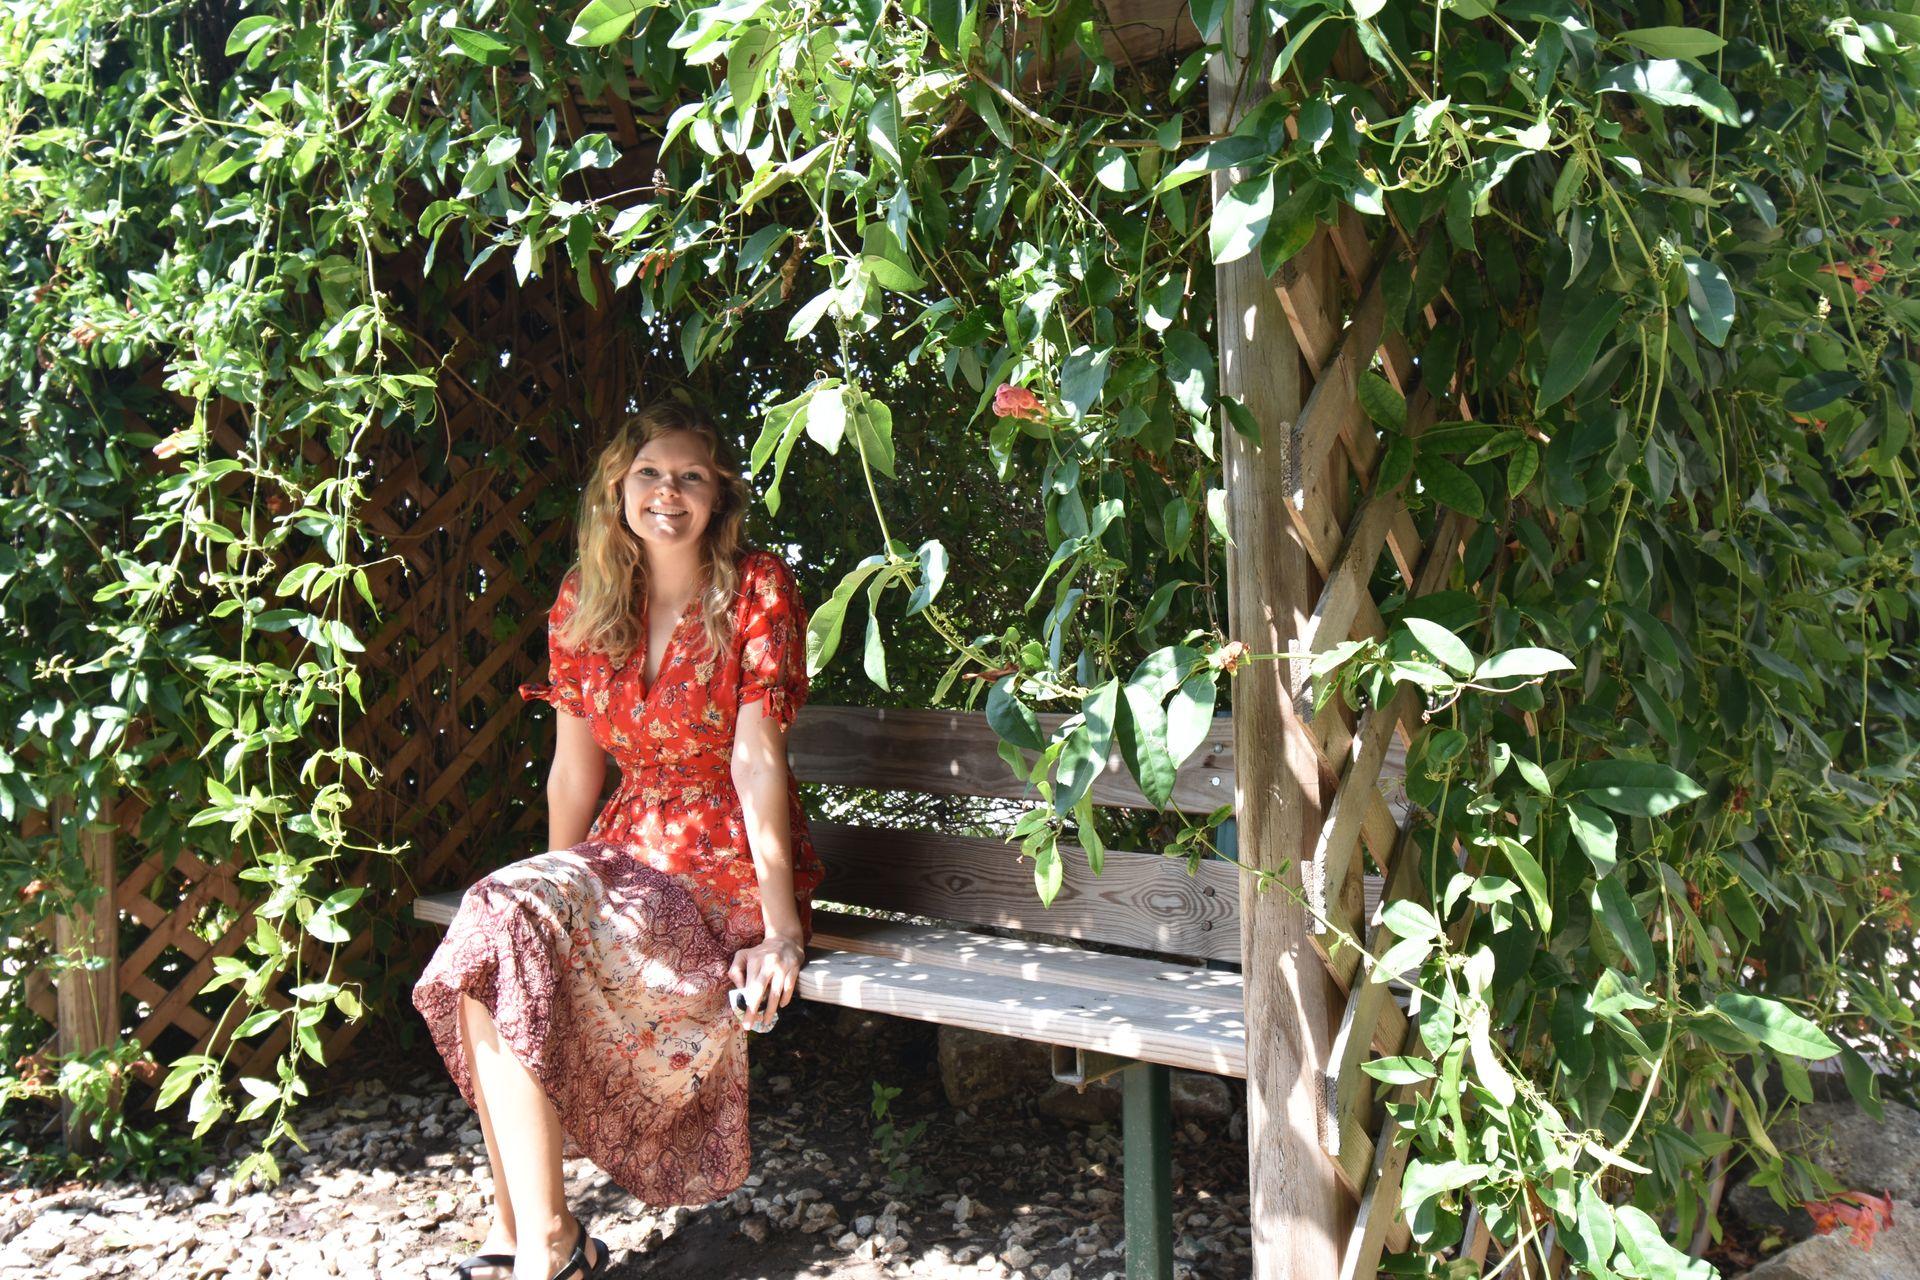 Lydia sitting on a wooden bench that is surrounded by green vines.